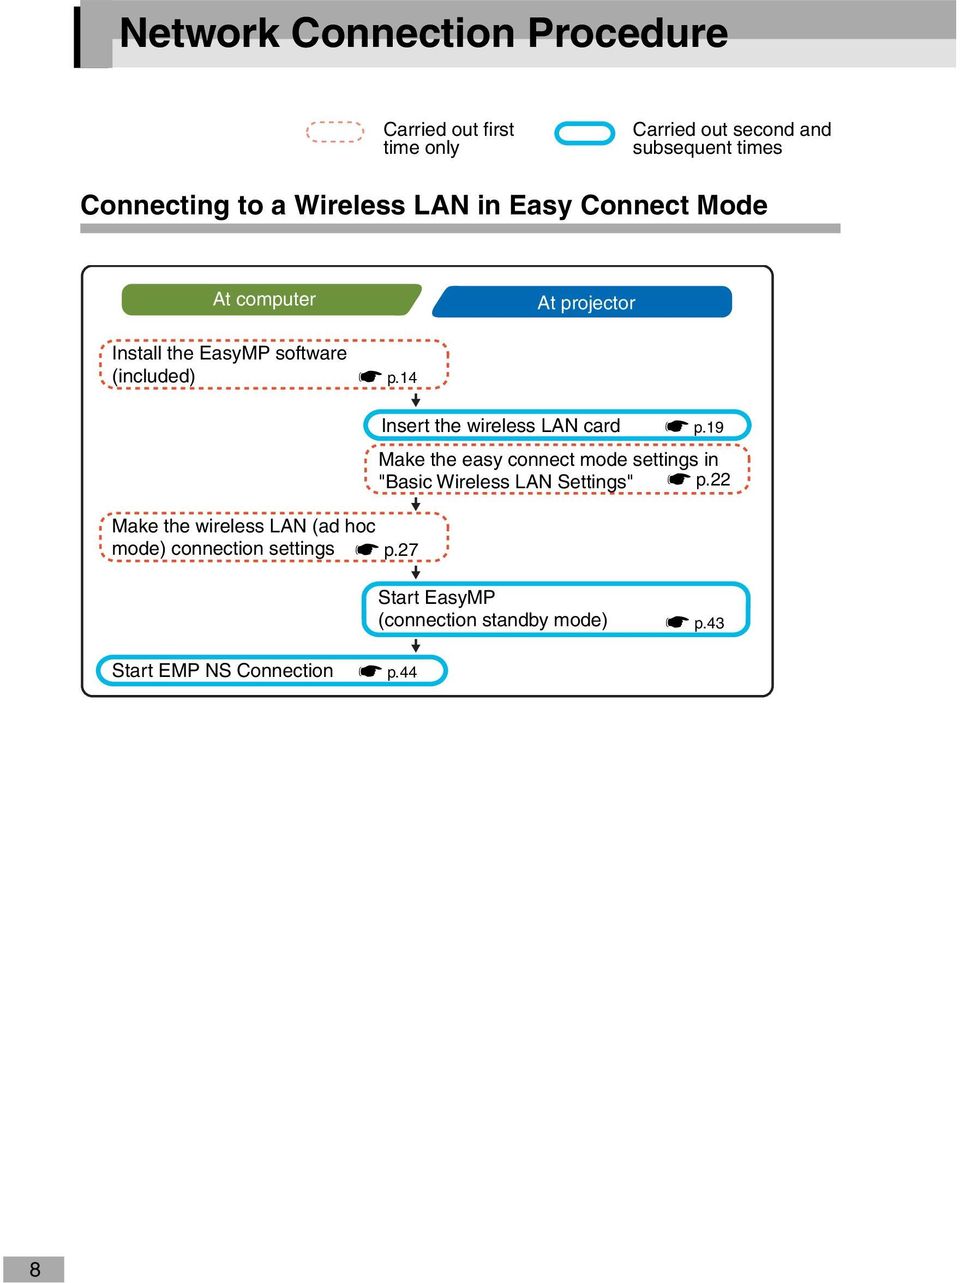 14 Insert the wireless LAN card sp.19 Make the easy connect mode settings in "Basic Wireless LAN Settings" sp.